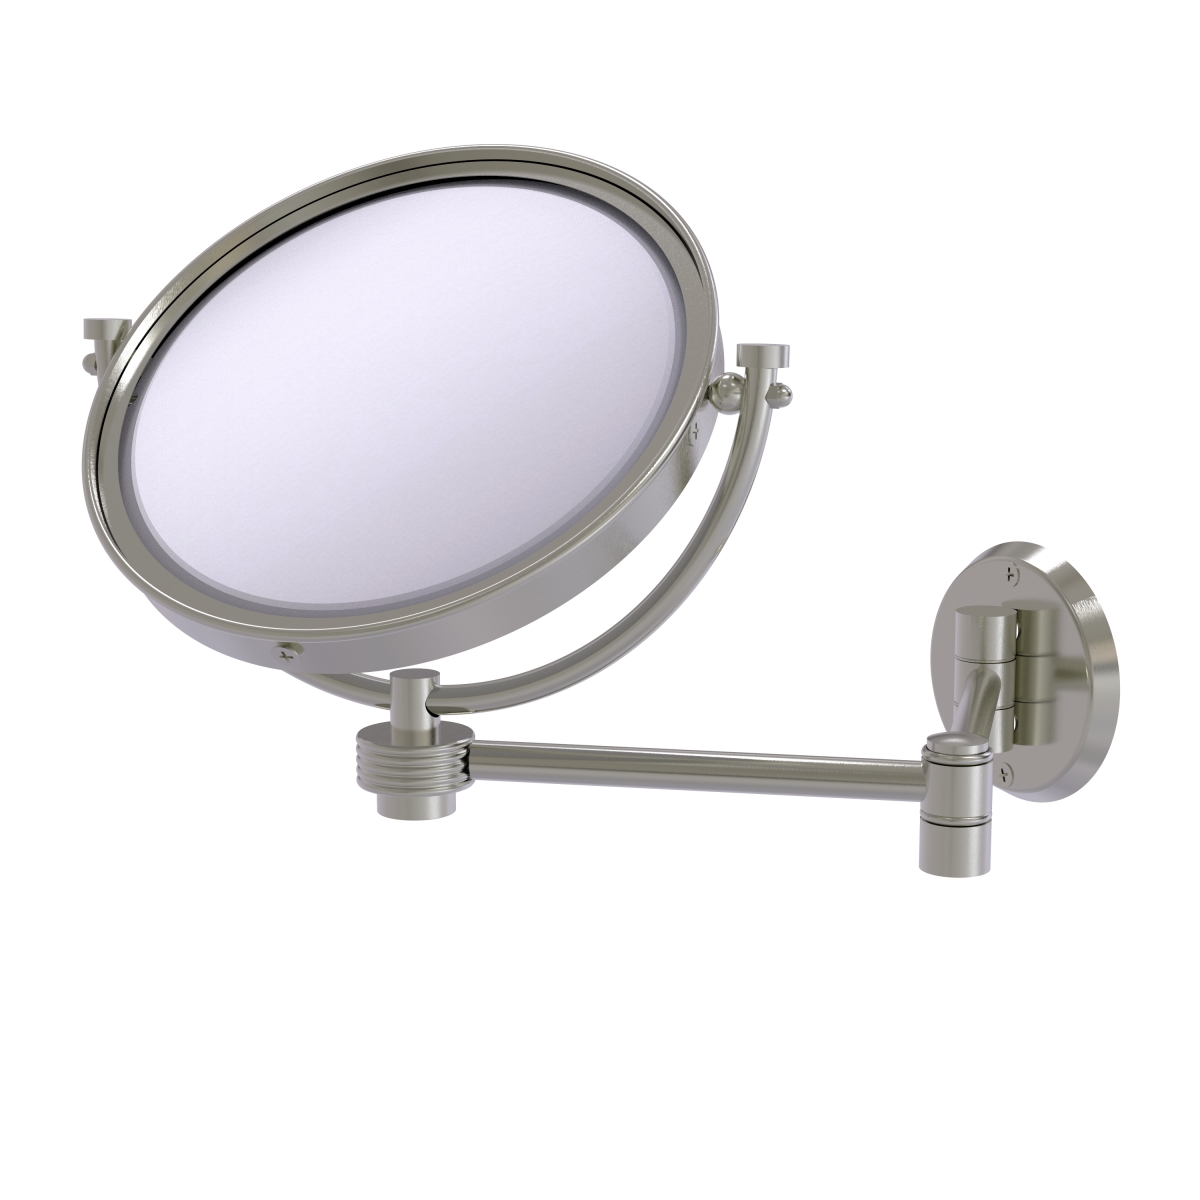 WM-6G-2X-SN 8 in. Wall Mounted Extending Make-Up Mirror 2X Magnification with Groovy Accent, Satin Nickel -  Allied Brass, WM-6G/2X-SN